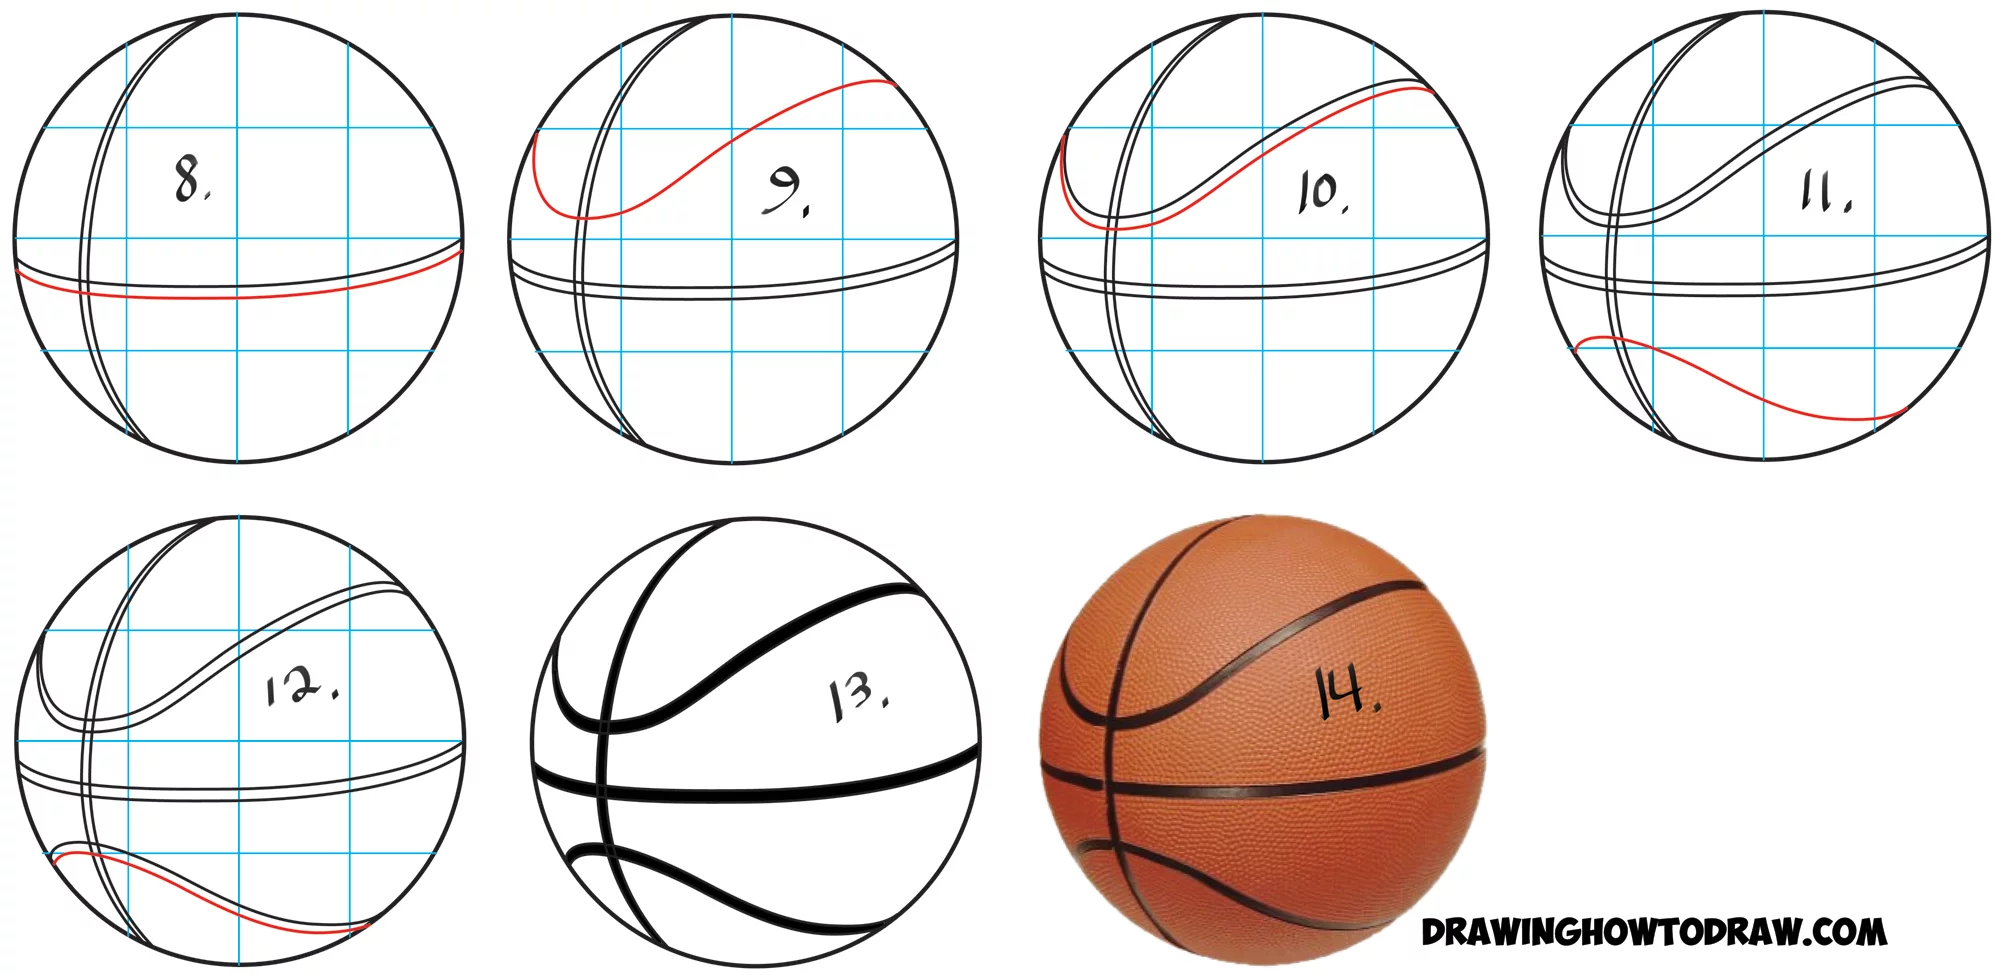 How to Draw a Basketball Player - Really Easy Drawing Tutorial